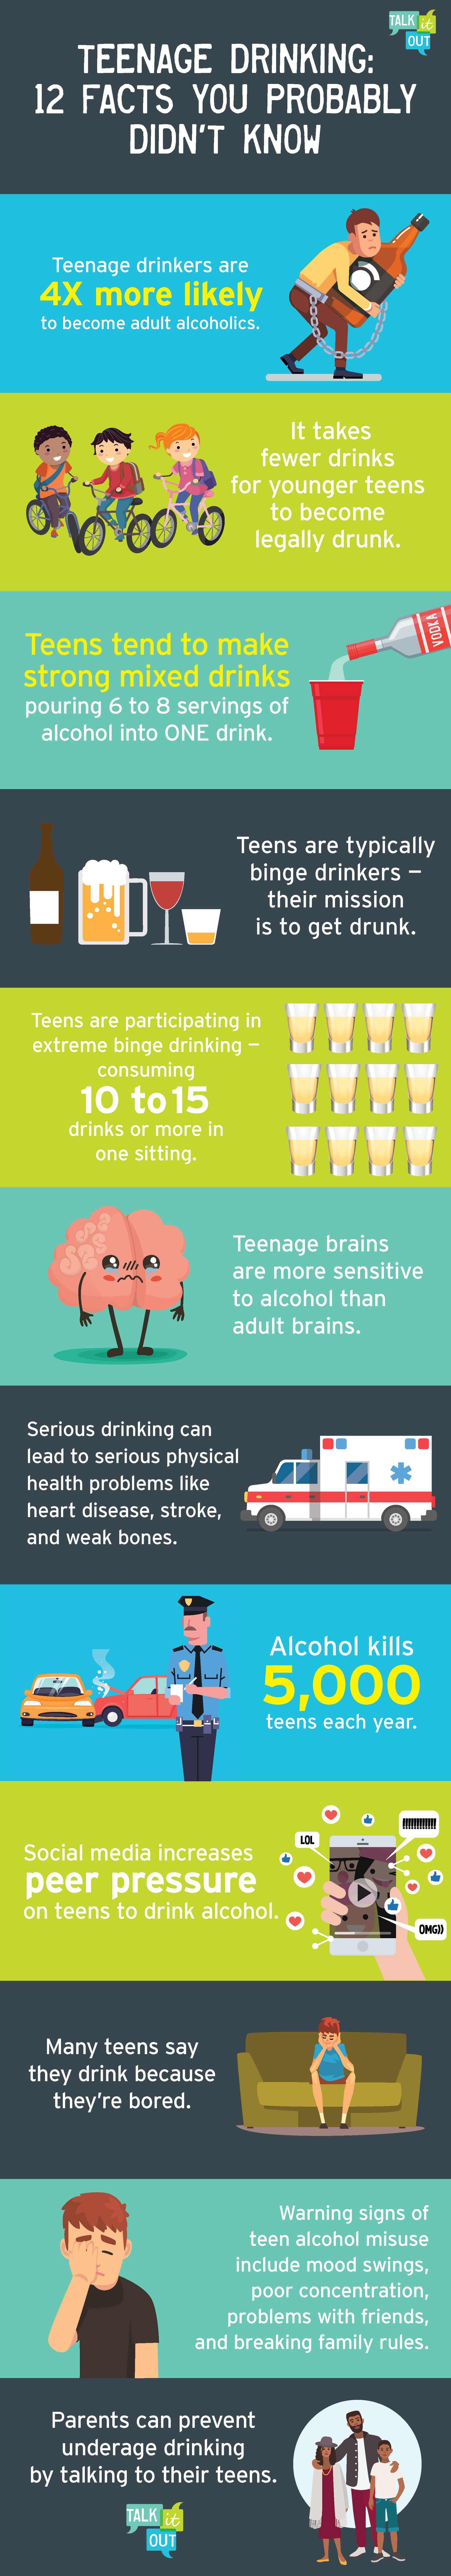 12 facts that people should know about underage drinking.